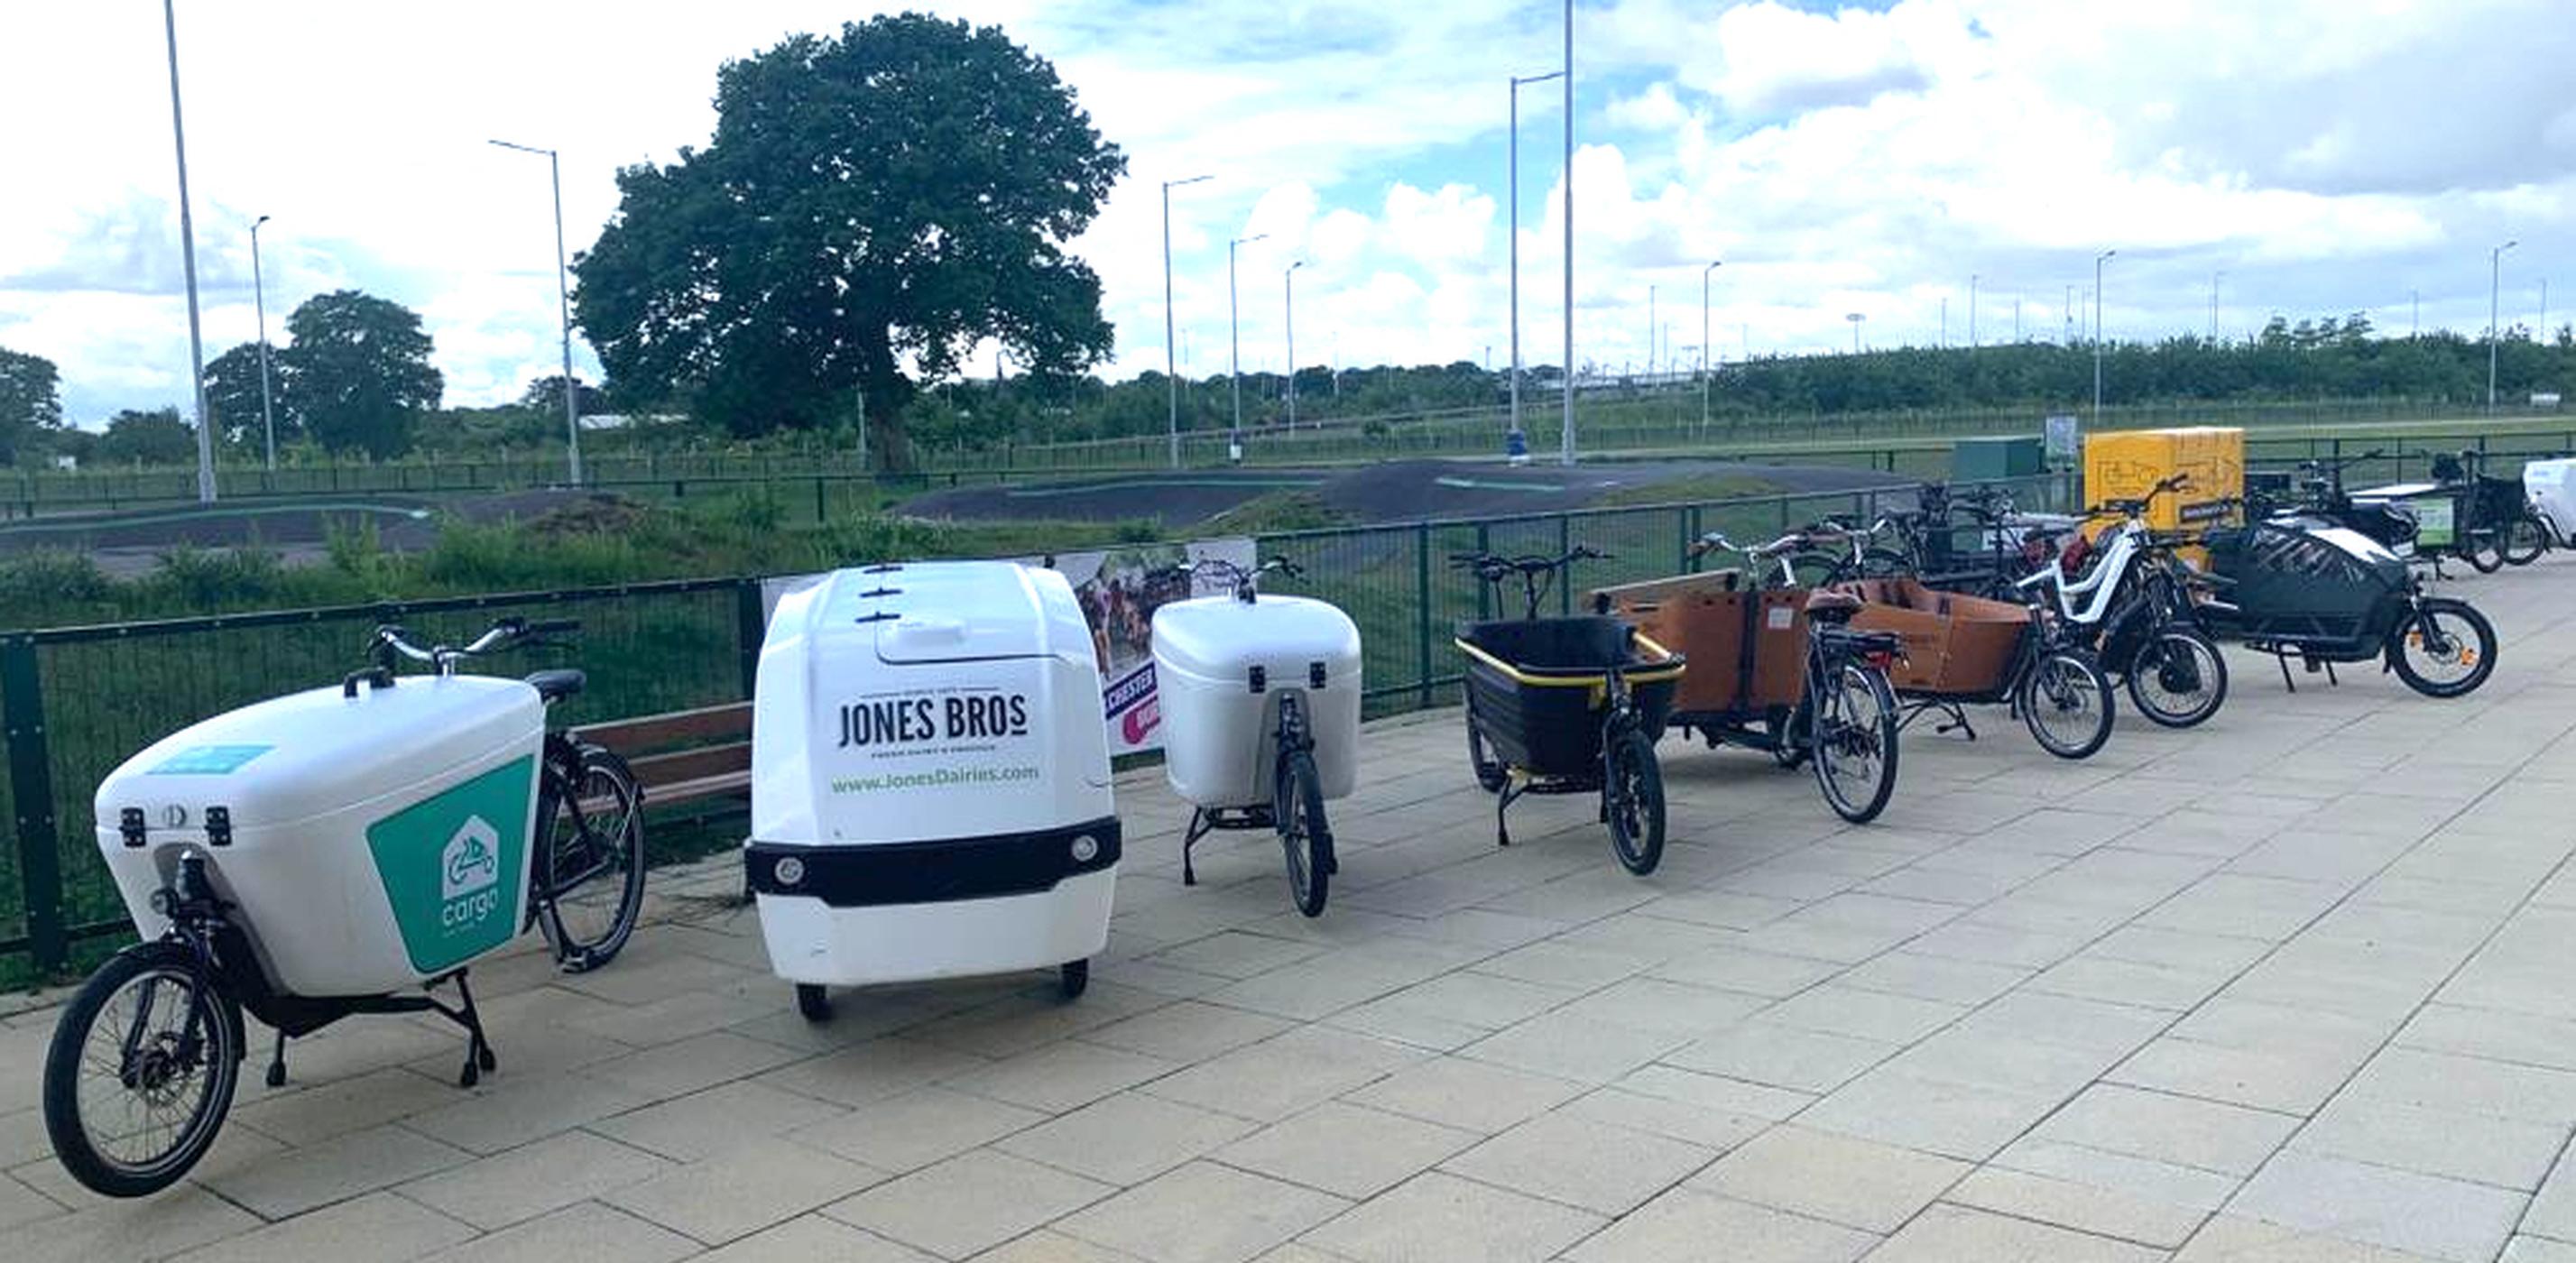 Cargo bikes come in all shapes and sizes